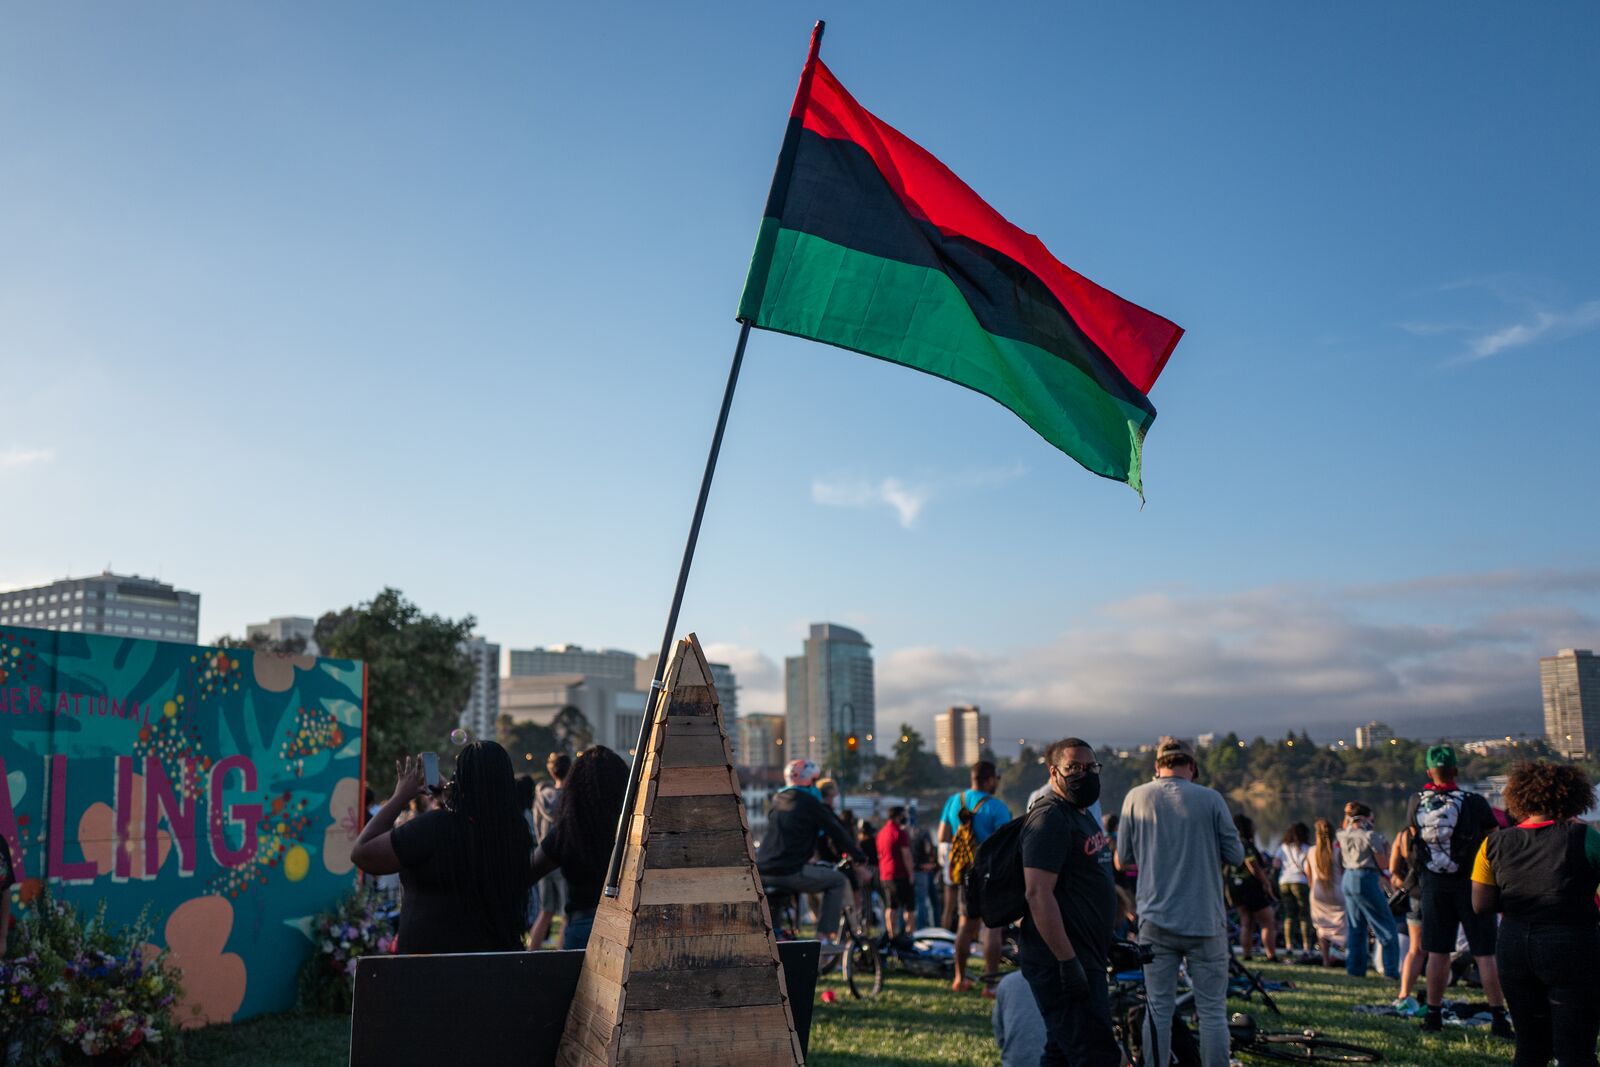 A pan-African flag stands tall above a crowd of people gathered with buildings in the background